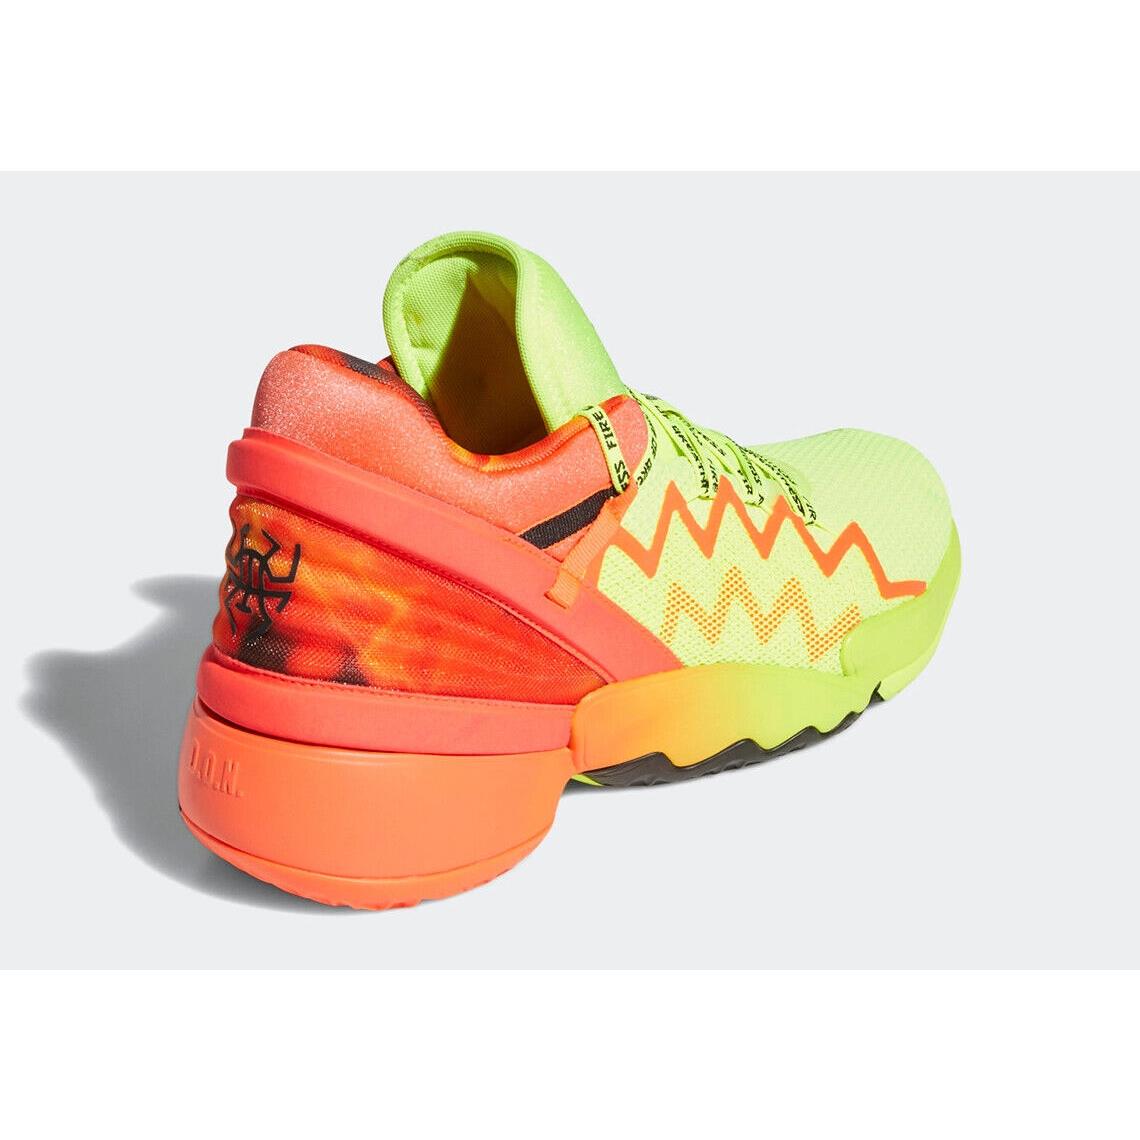 Adidas shoes  - Solar Yellow/Solar Red/Core Black 9